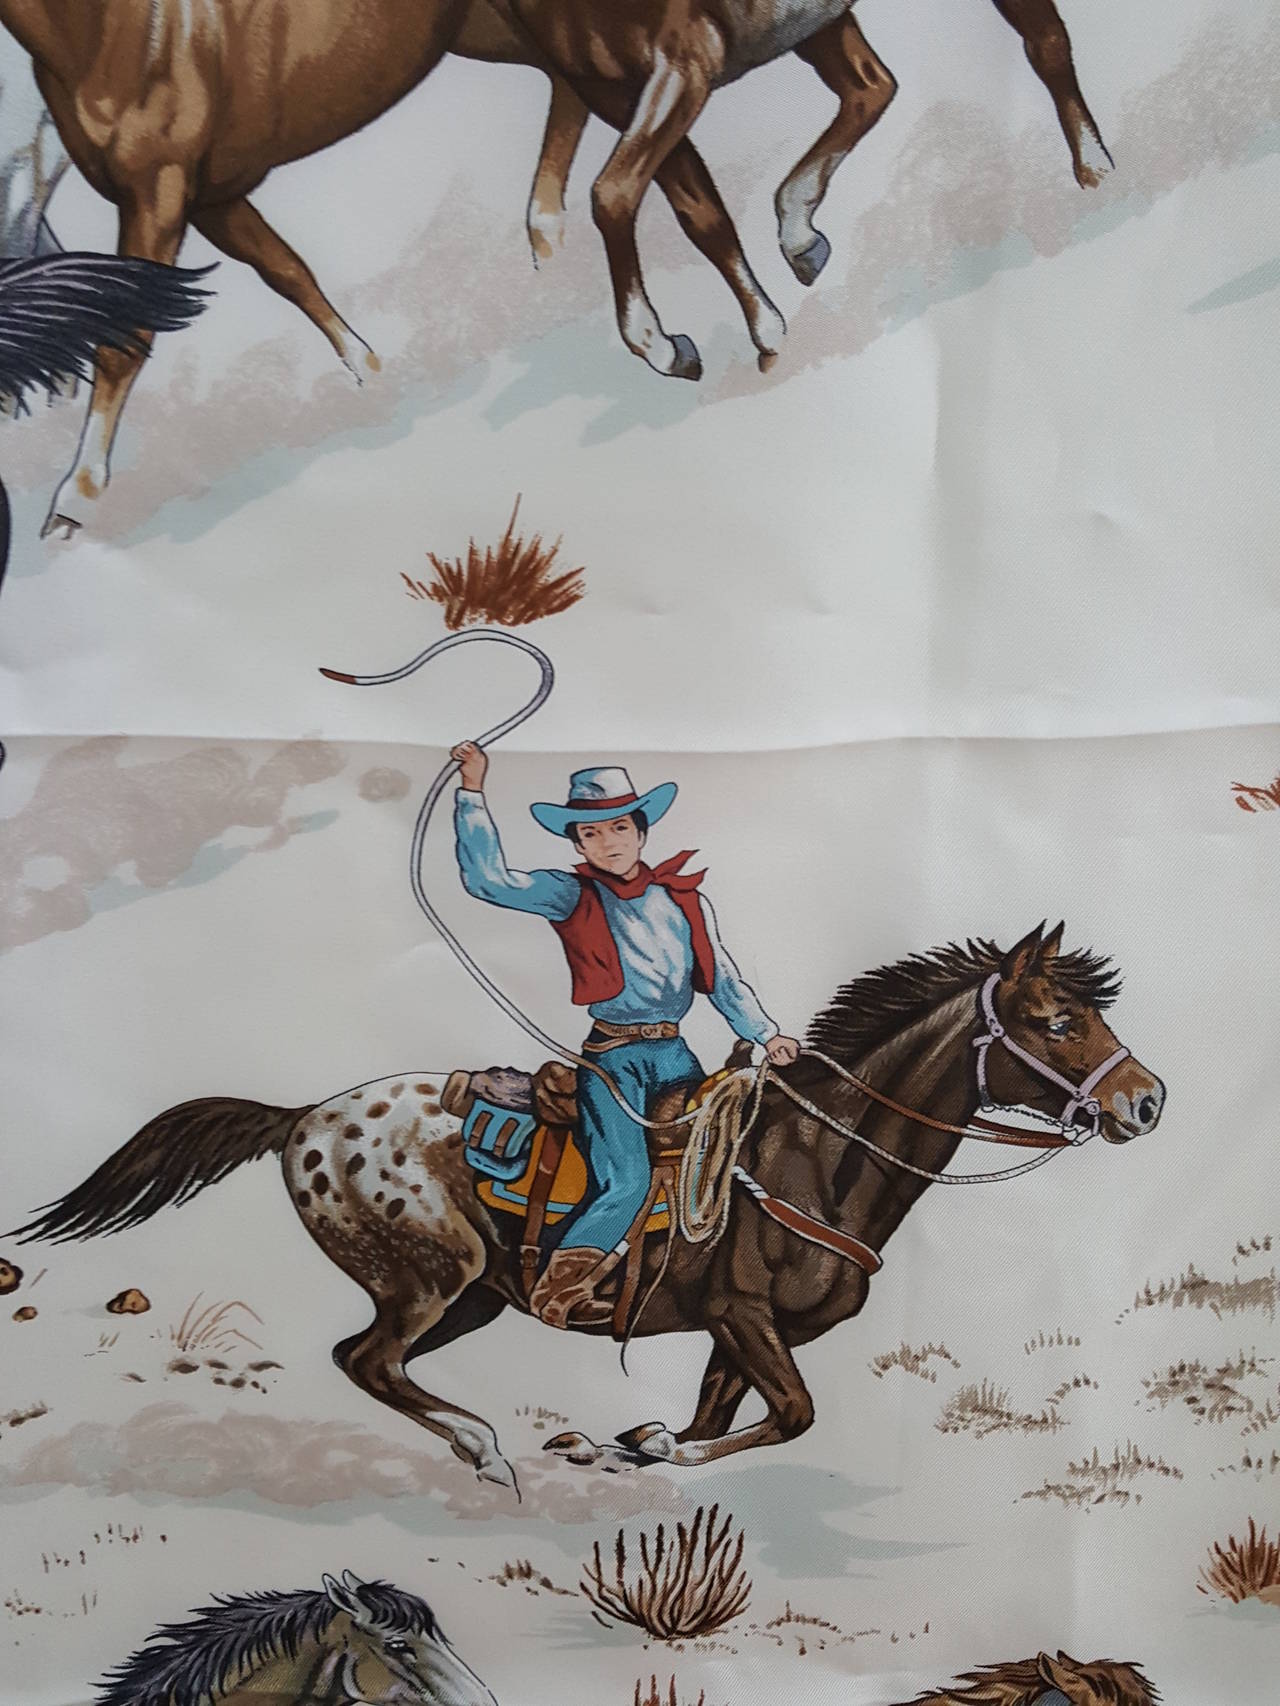 Offered for sale is this lovely Hermes scarf by Robert Dallet from 1993/1994 in
white, rich brown tones, gray, and with the colored cowboys in in blue and rust.
The mustangs are depicted beautifully and the added colors really make the scarf come